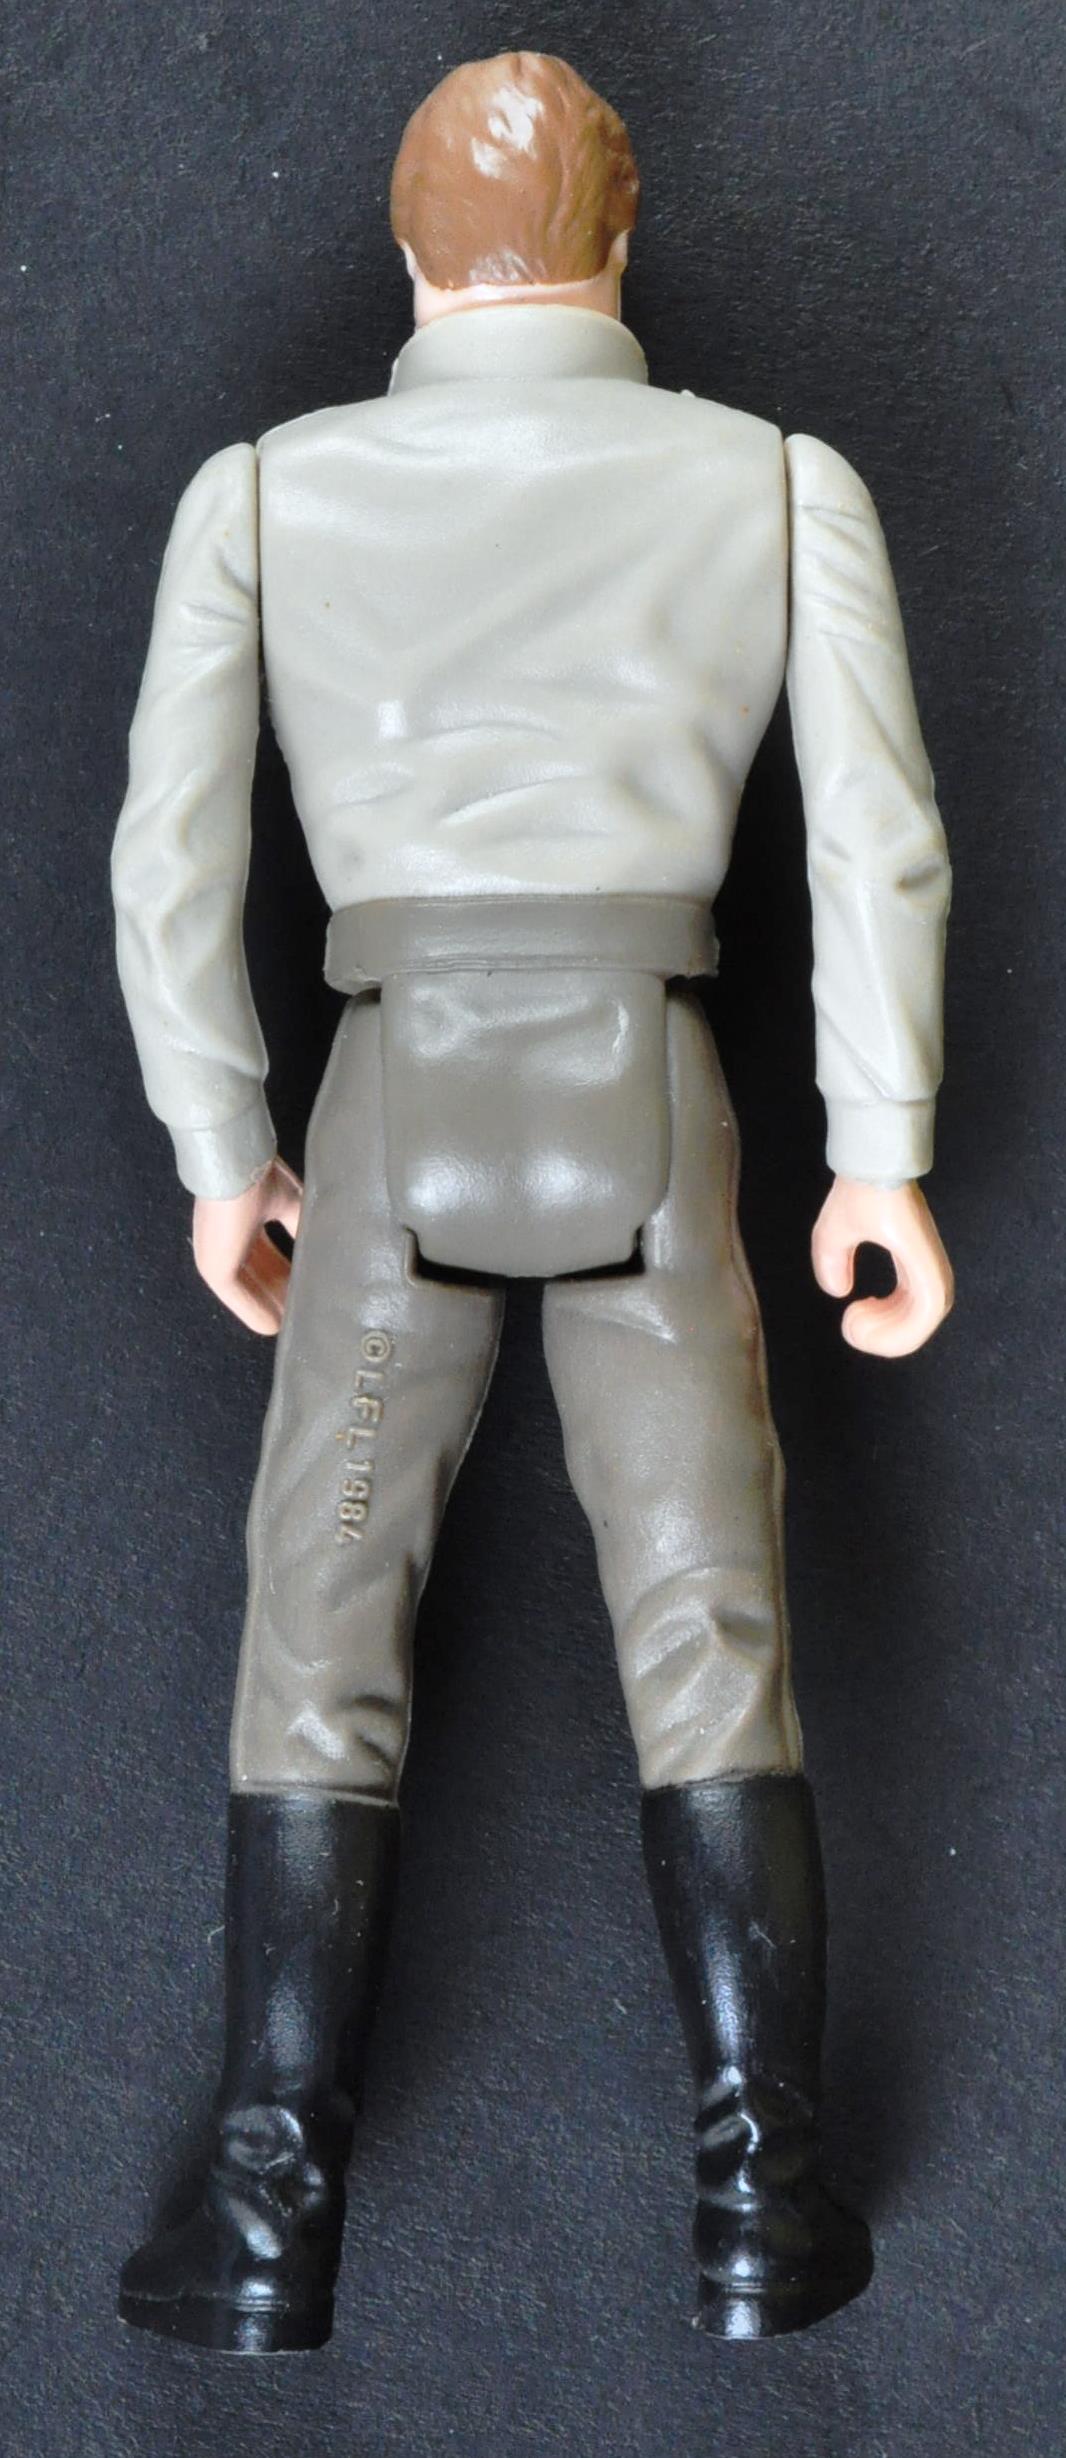 STAR WARS - LAST 17 HAN SOLO IN CARBONITE CHAMBER FIGURE - Image 3 of 5